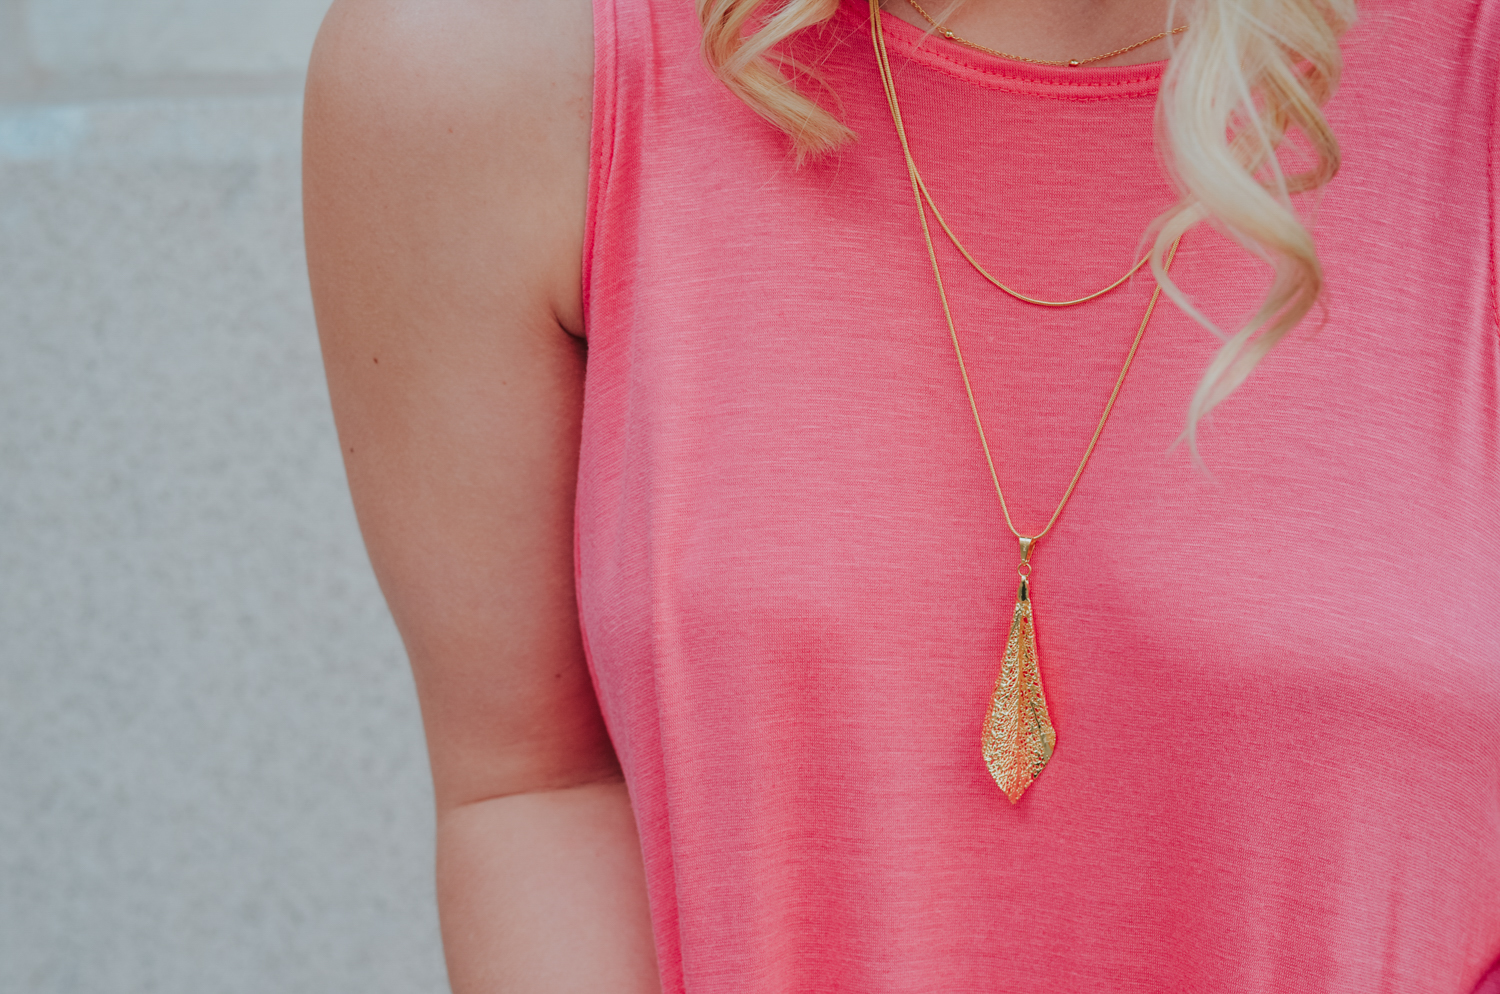 Glamorous, eco-friendly layered necklace from sustainable jewelry brand @simplynaturebiogoods